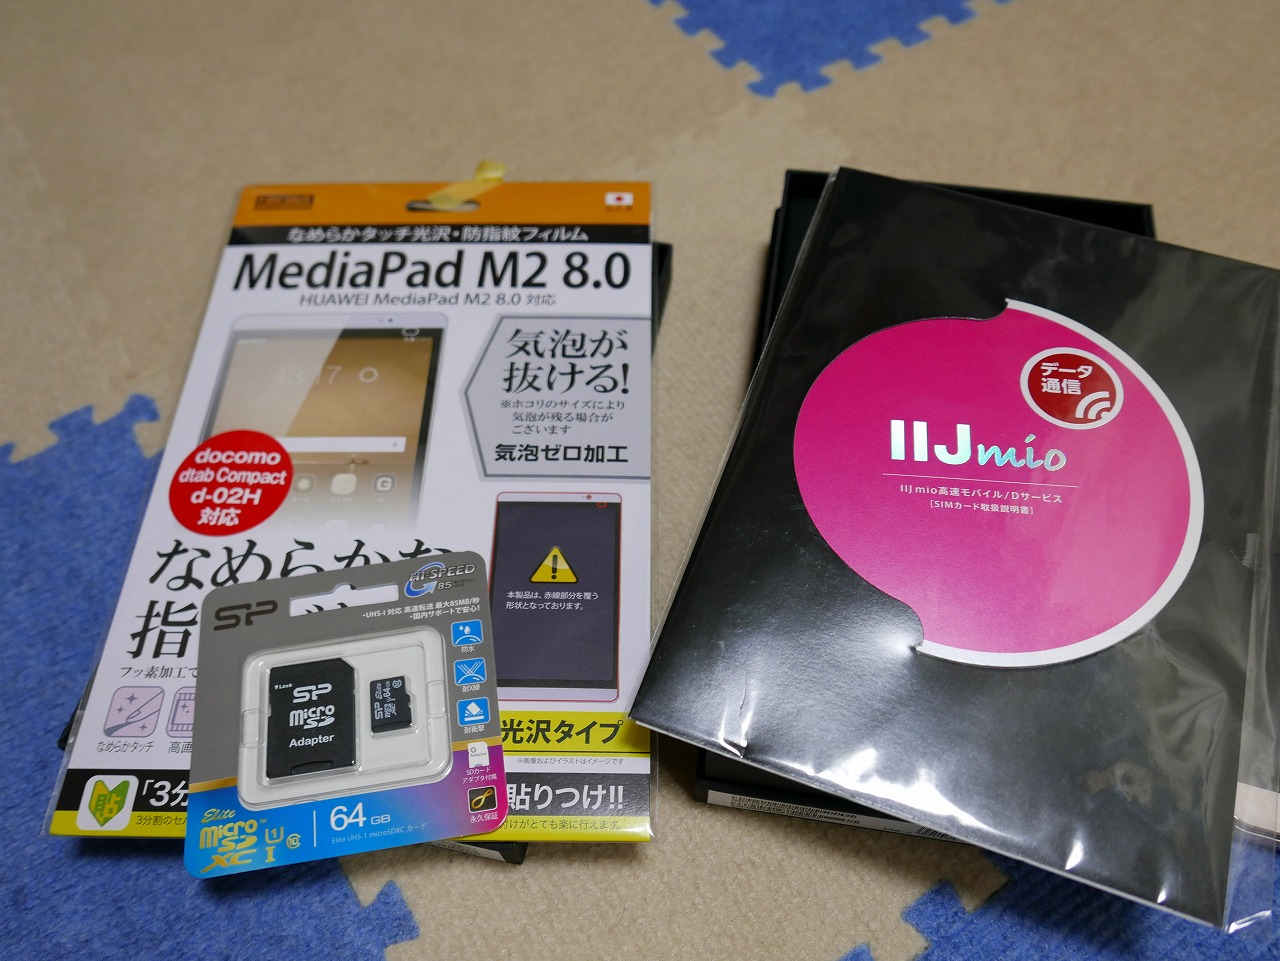 MediaPad M2 8.0を衝動買い - The unknown world